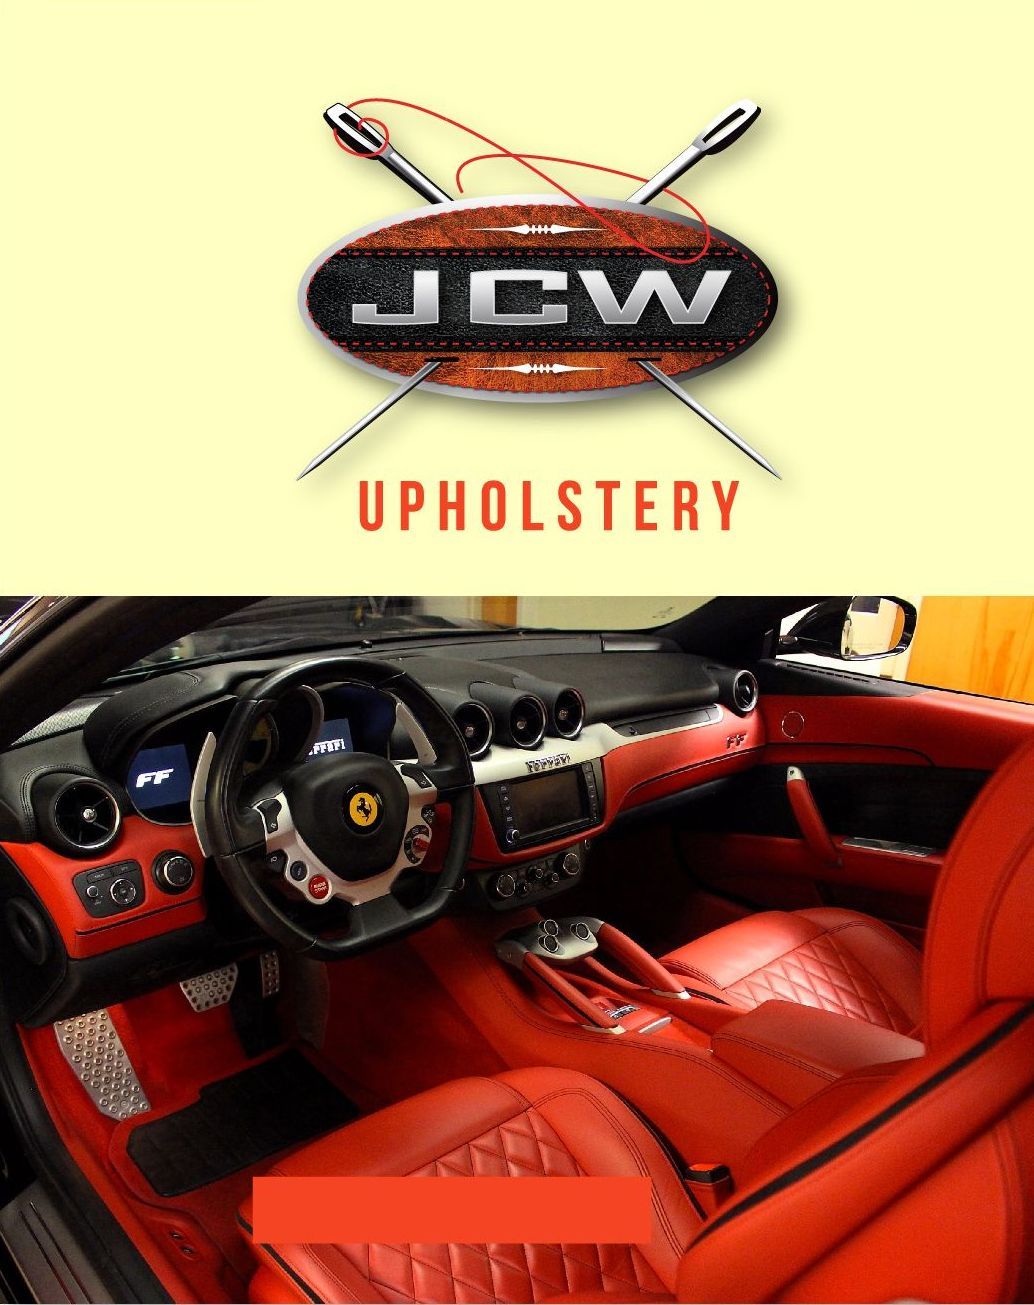 An ad for jcw upholstery with a picture of a car